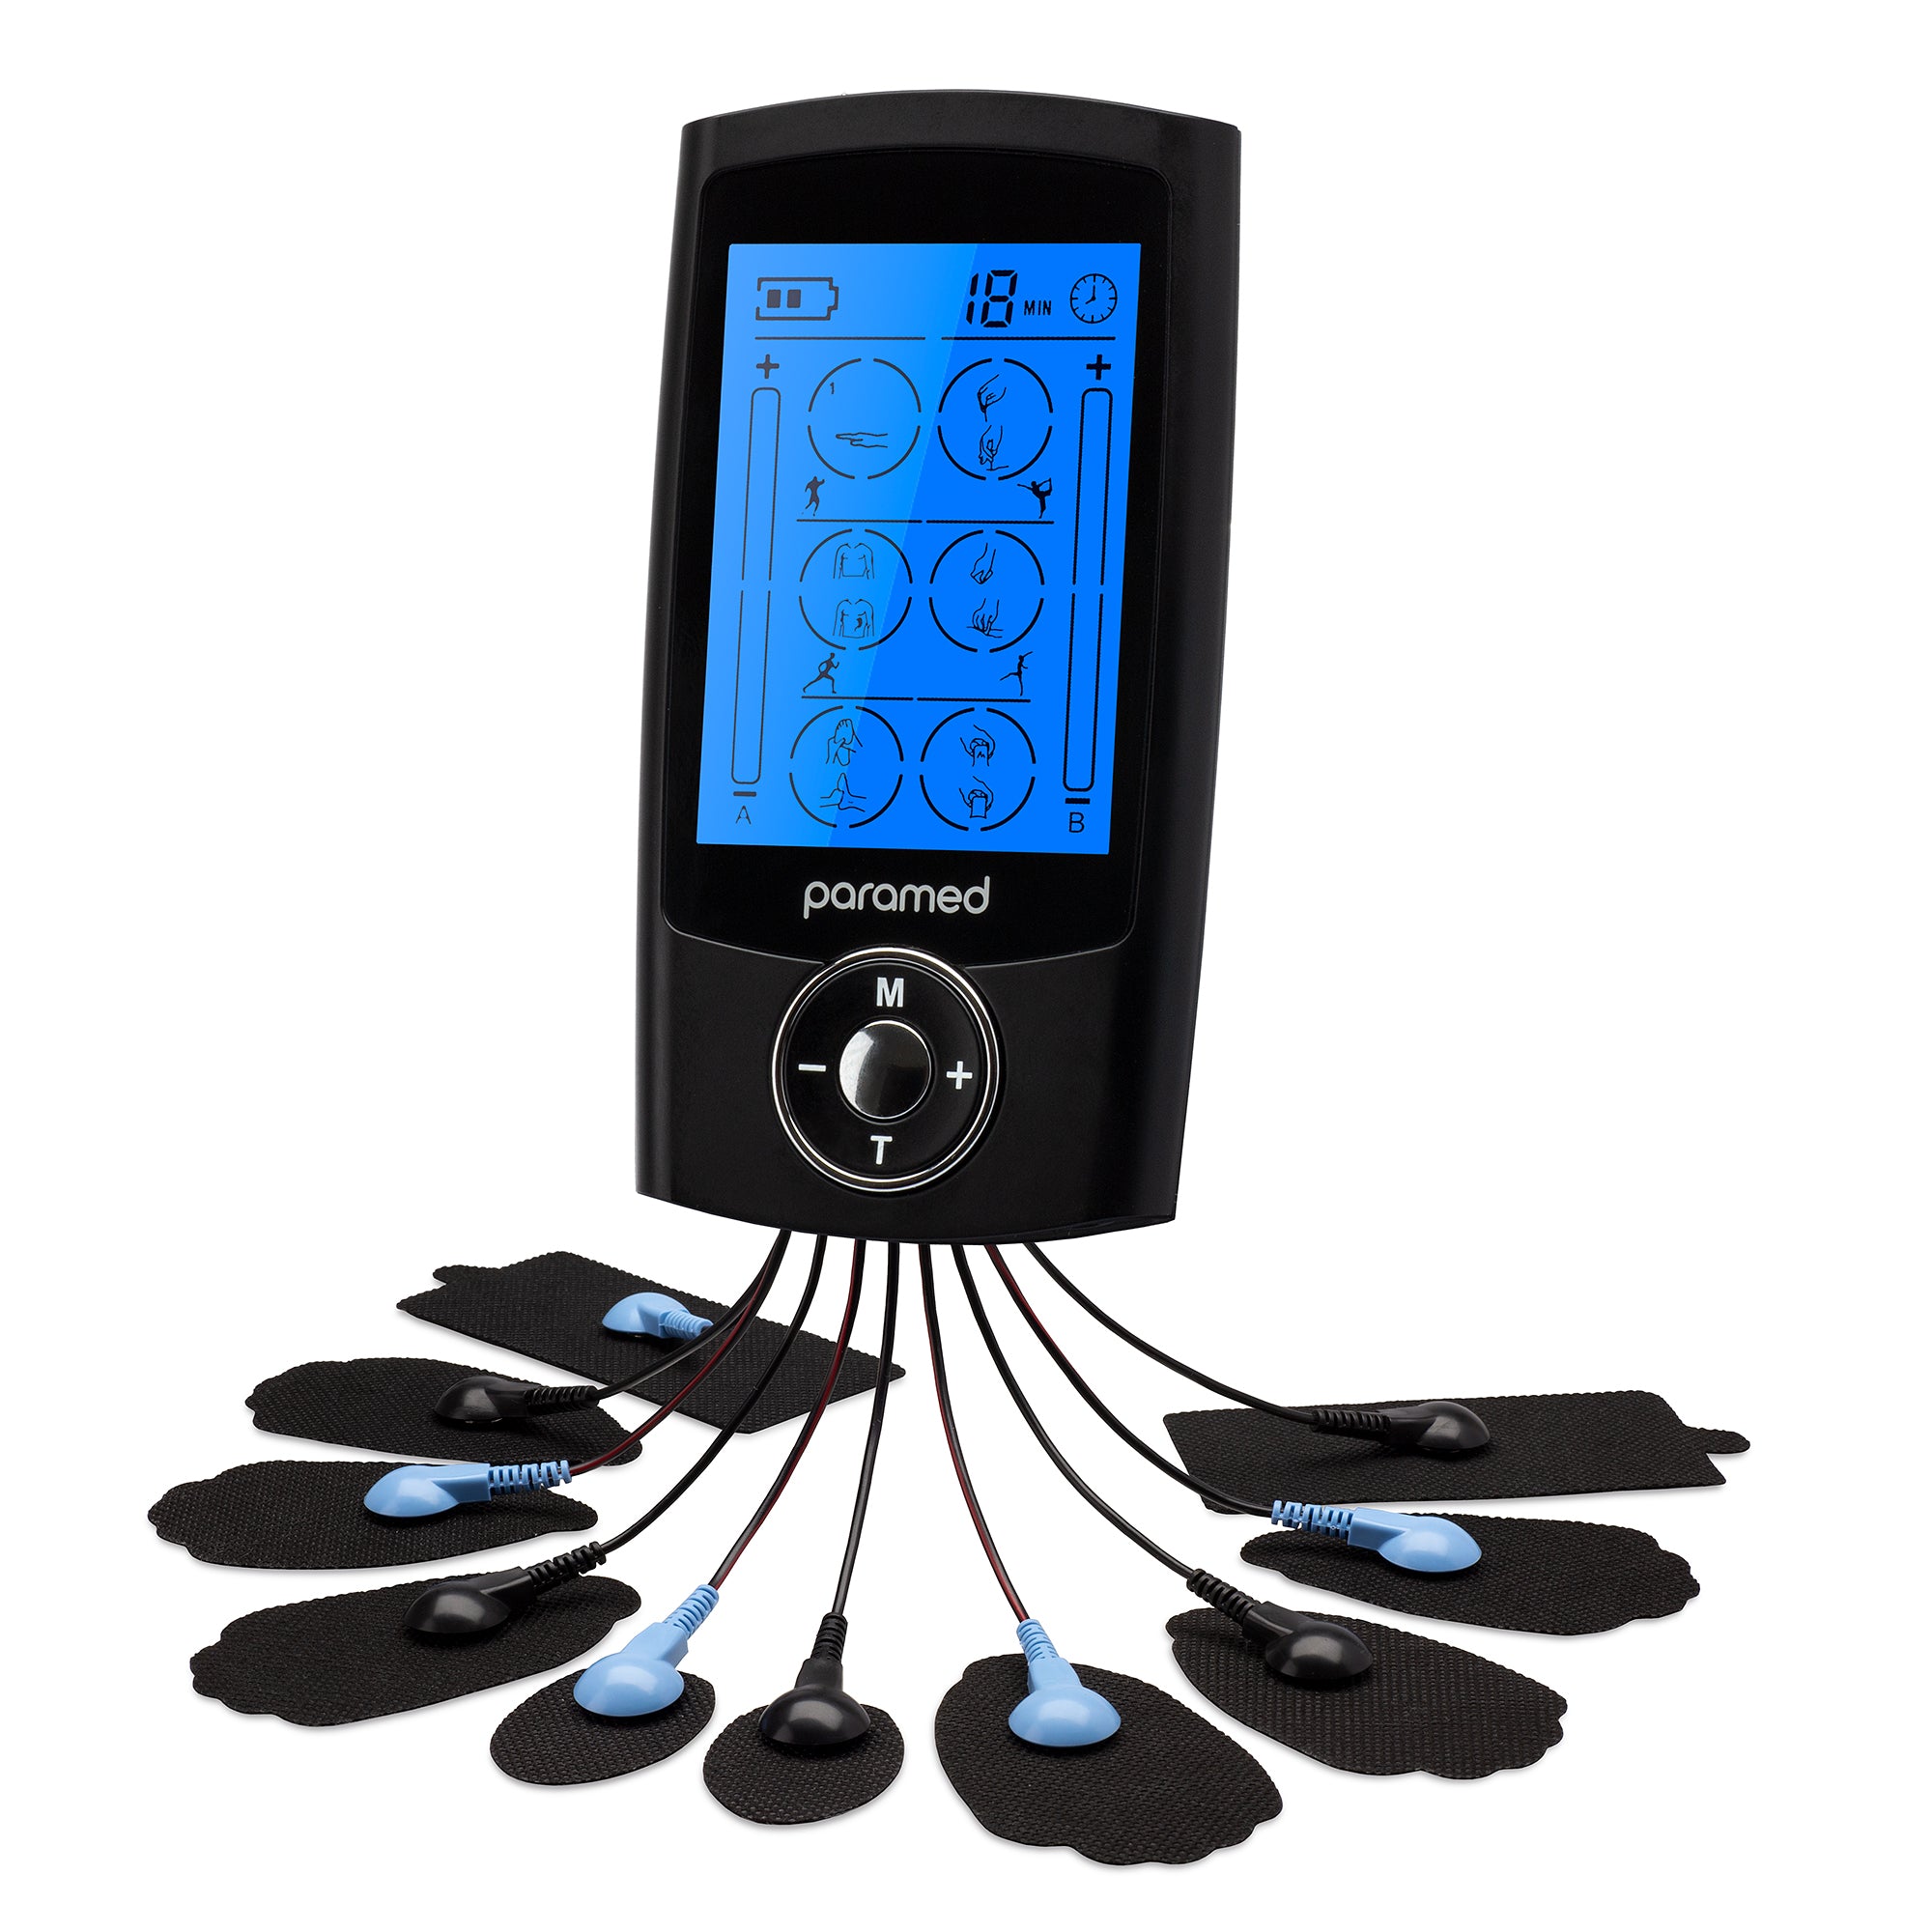  OMEGA Wireless TENS Unit Muscle Stimulator with Large  Touchscreen Remote, 2 Back Pain Relief Tensunit Pads, Muscle Stimulator  Machine with 6 Modes, USB Charger : Health & Household